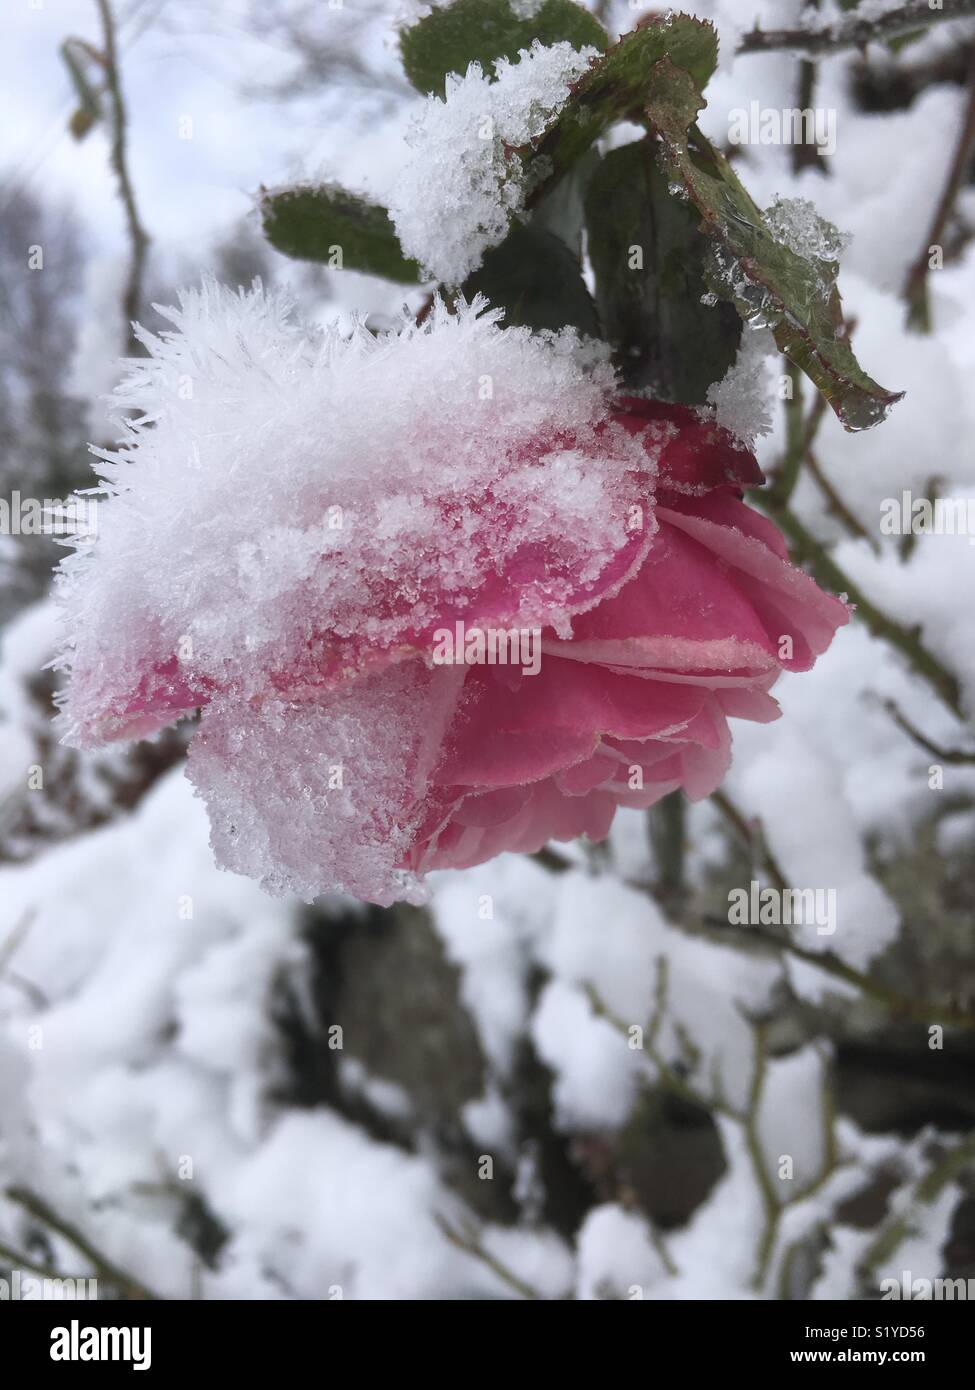 Rose flower frozen and engulfed in snow, Wye Valley, 12th December 2017 Stock Photo